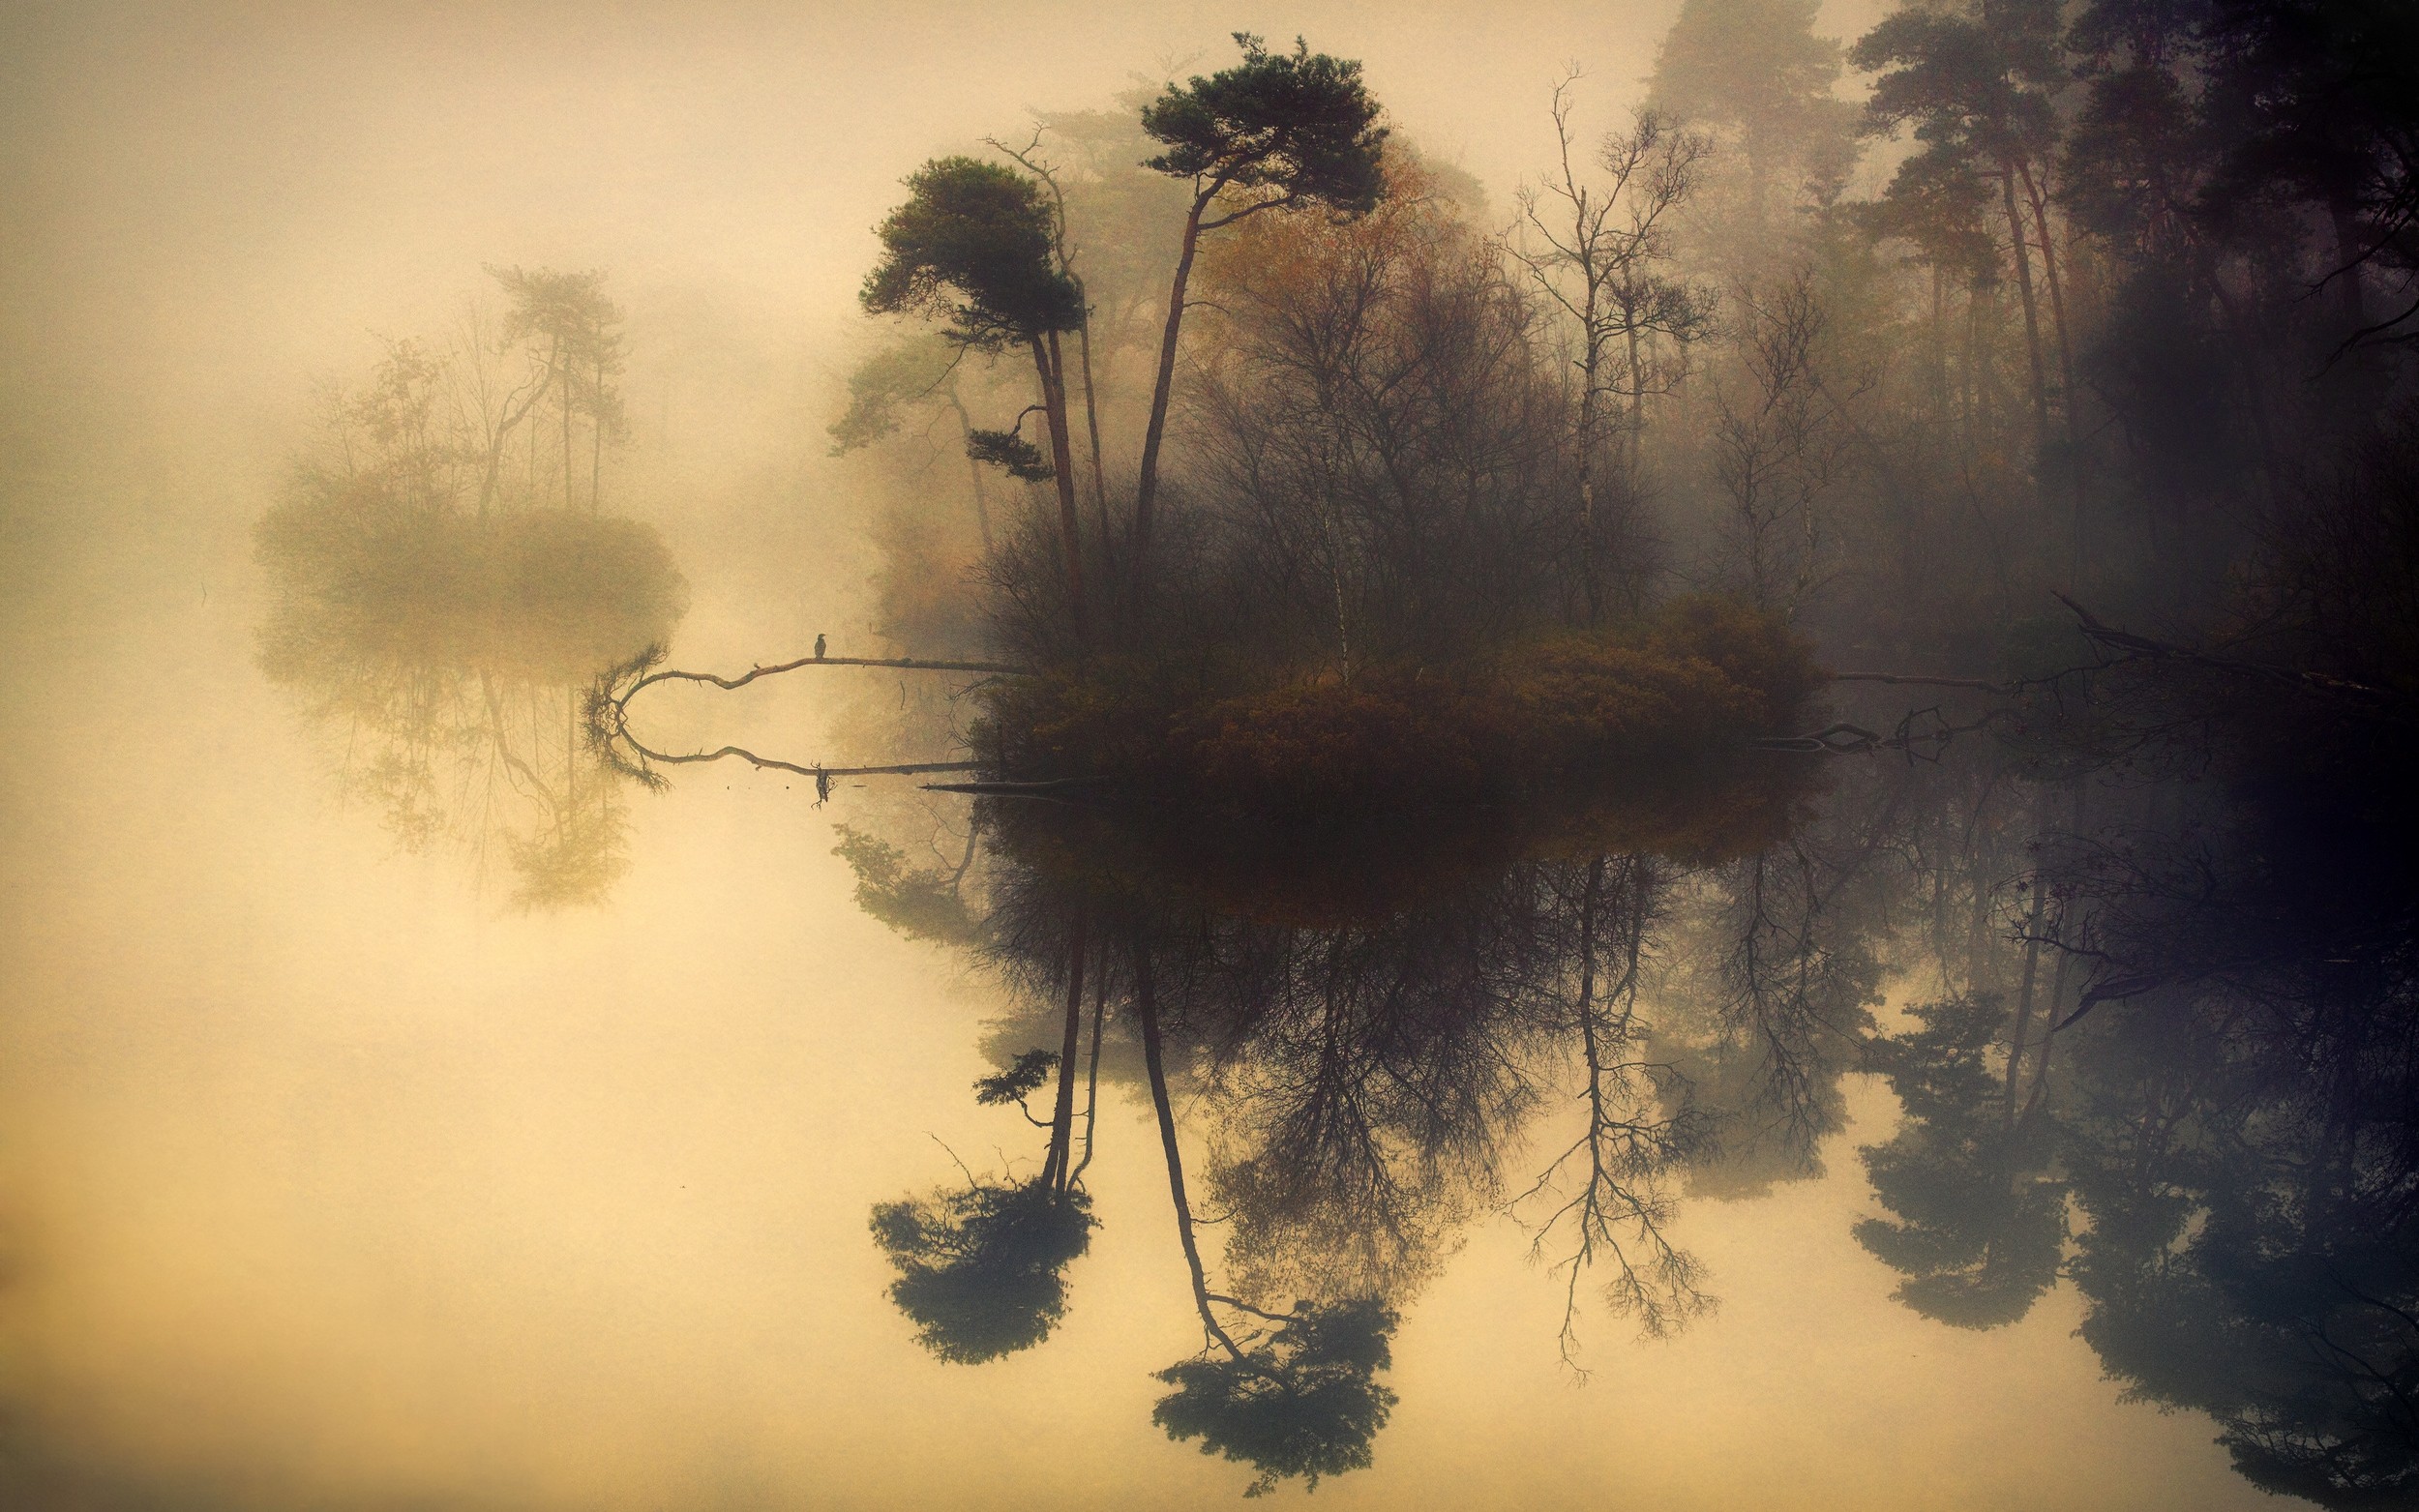 Nature Landscape Mist Lake Trees Water Reflection Shrubs Fall Birds Calm Morning Beige Pine Trees 2500x1563